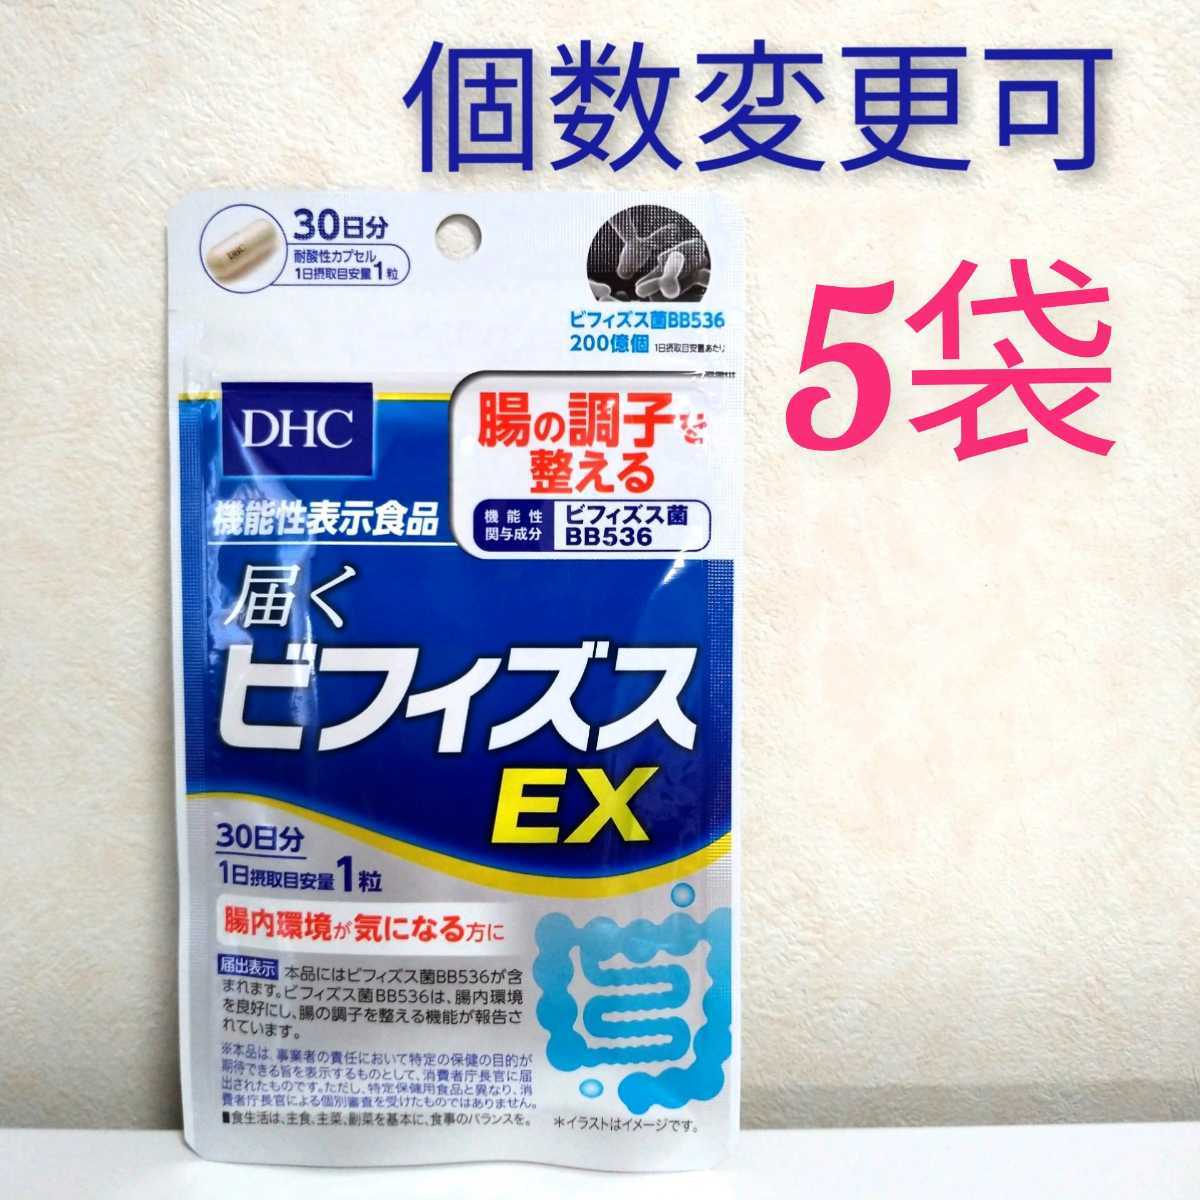 DHC　届くビフィズスEX30日分×5袋　個数変更可 その他